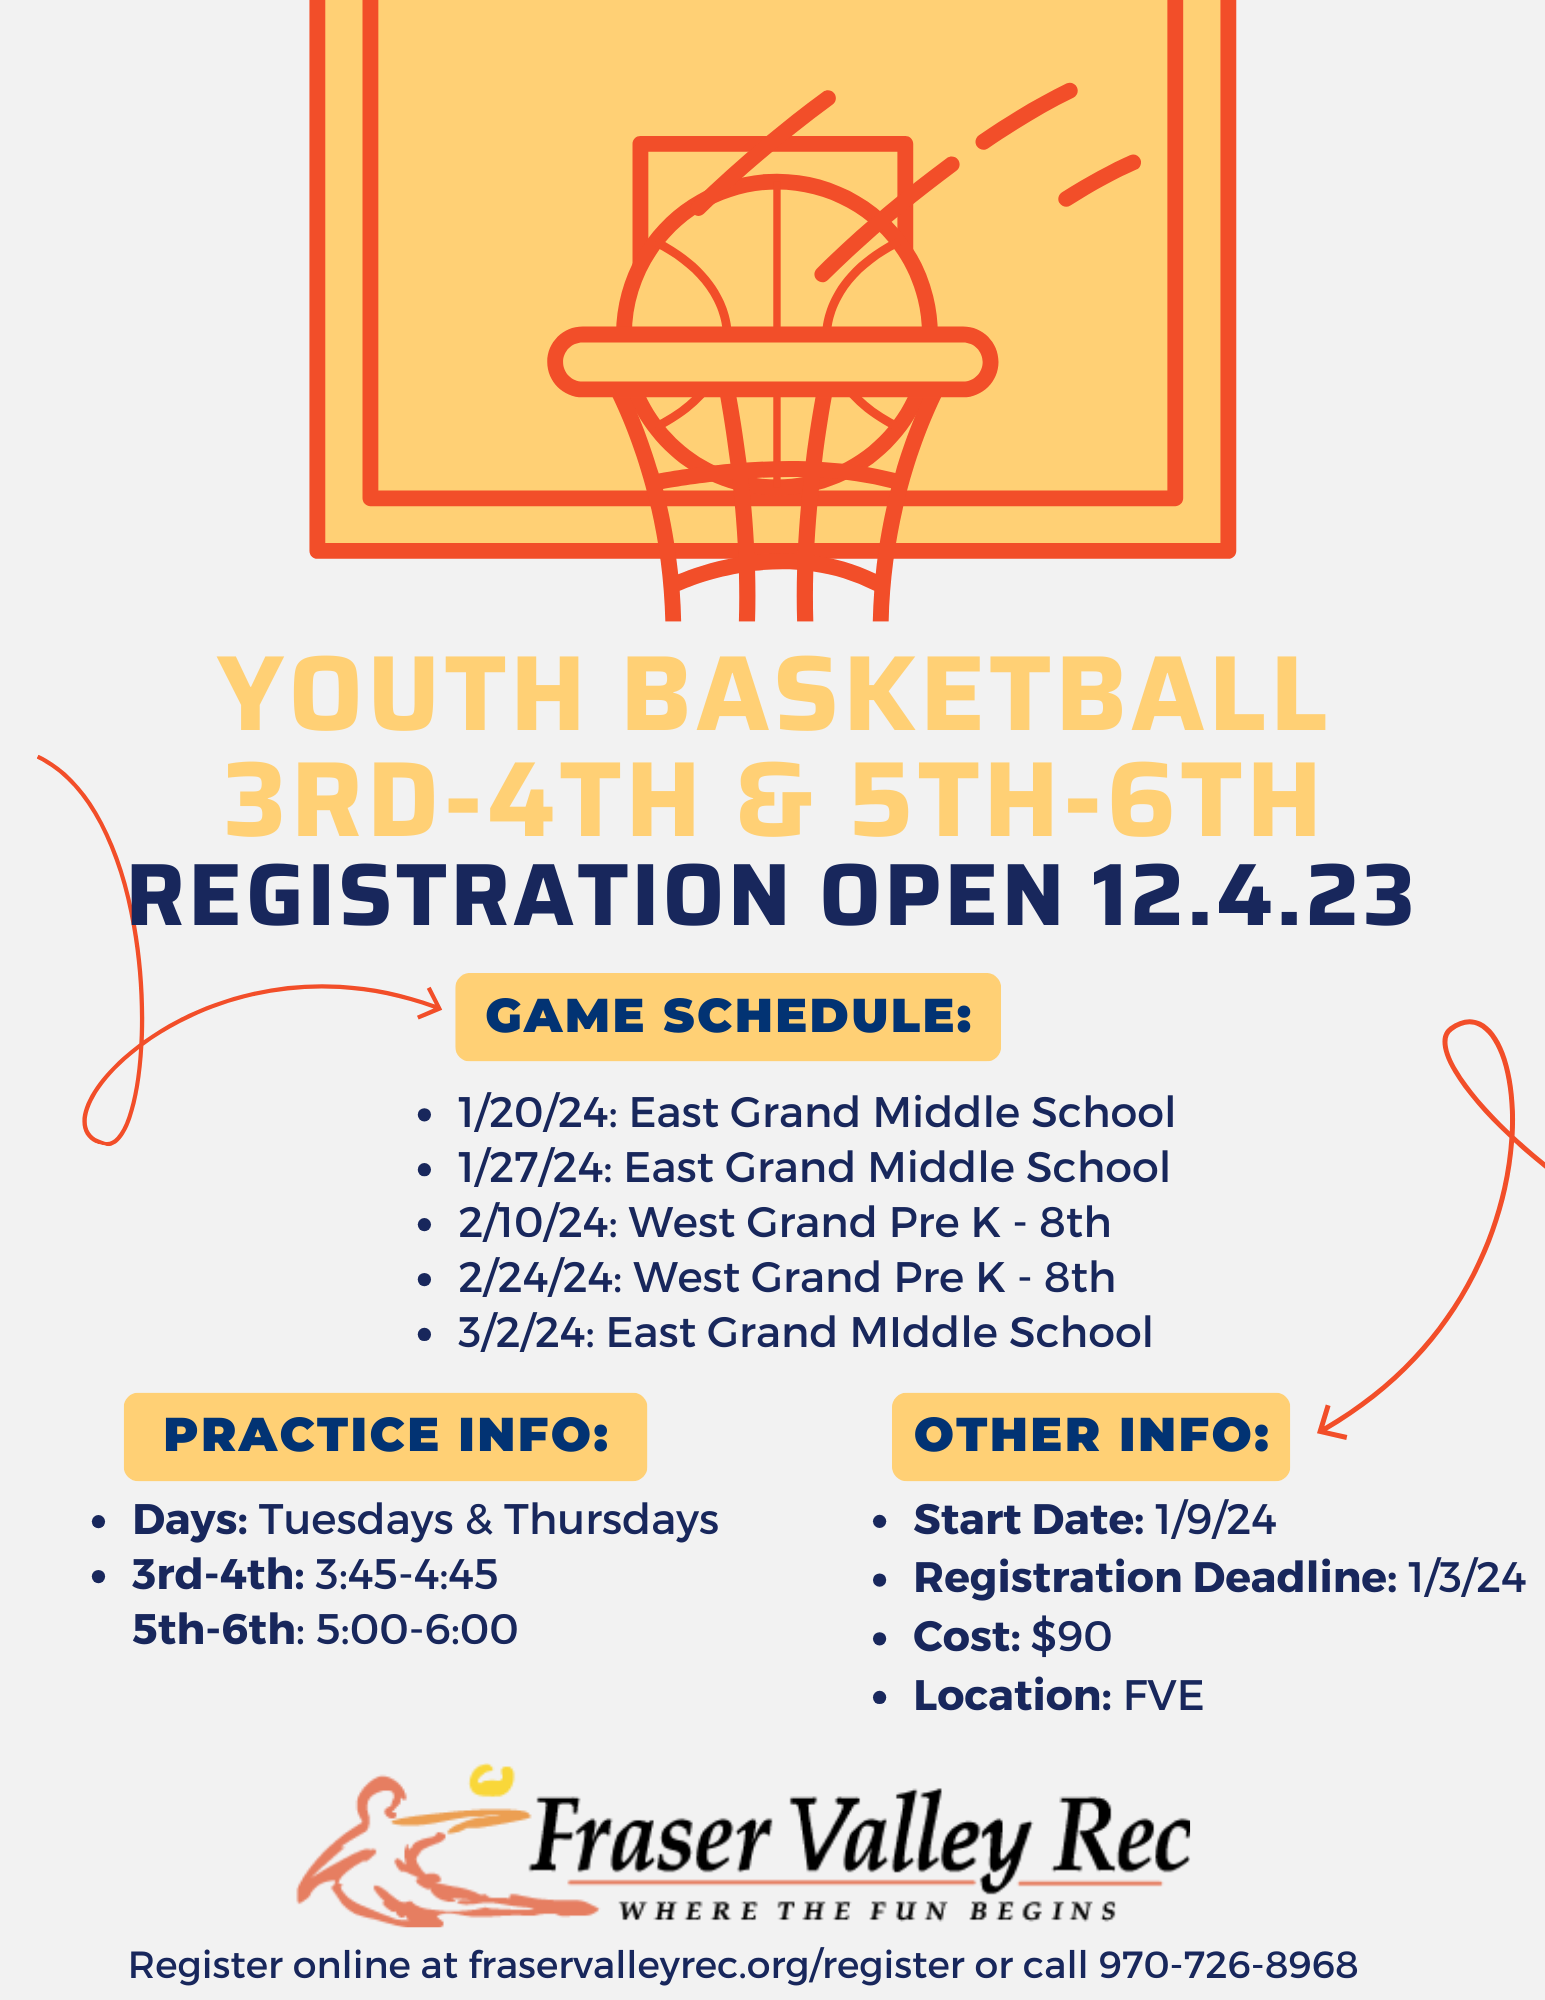 A vibrant flyer announcing a youth basketball league for 3rd-4th and 5th-6th graders with registration opening on December 4, 2023. It outlines the game schedule with dates and locations, practice information for Tuesdays and Thursdays, including times for each age group, and other key details such as the start date, registration deadline, cost, and location. The flyer features a basketball hoop graphic and the Fraser Valley Rec logo, and provides a website for registration and a phone number for more information.